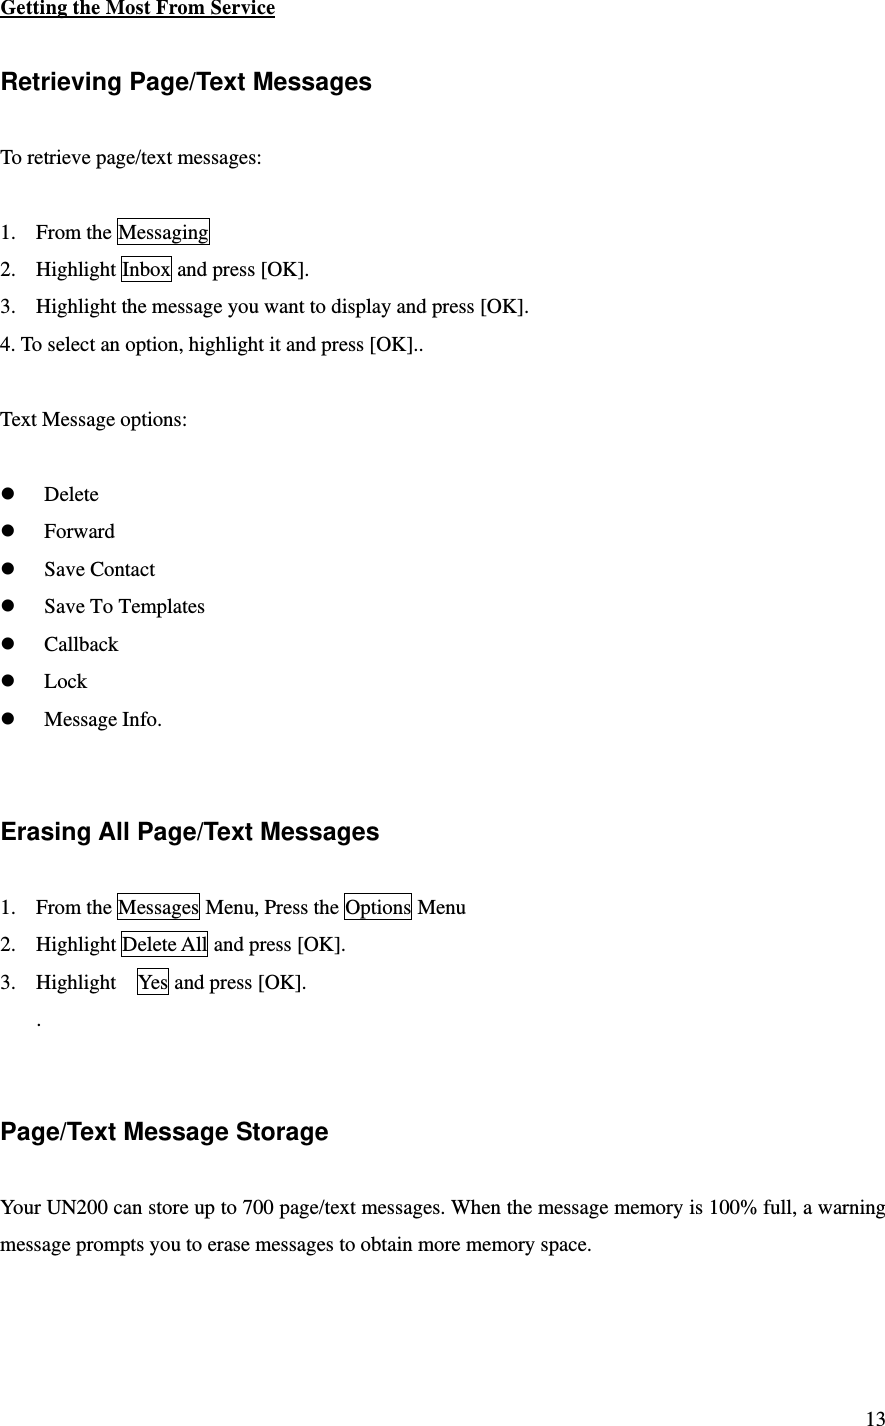 13 Getting the Most From Service  Retrieving Page/Text Messages  To retrieve page/text messages:  1. From the Messaging   2. Highlight Inbox and press [OK].   3. Highlight the message you want to display and press [OK].   4. To select an option, highlight it and press [OK]..  Text Message options:  z Delete z Forward z Save Contact z Save To Templates z Callback z Lock z Message Info.   Erasing All Page/Text Messages  1. From the Messages Menu, Press the Options Menu 2. Highlight Delete All and press [OK]. 3. Highlight    Yes and press [OK]. .   Page/Text Message Storage  Your UN200 can store up to 700 page/text messages. When the message memory is 100% full, a warning message prompts you to erase messages to obtain more memory space.   